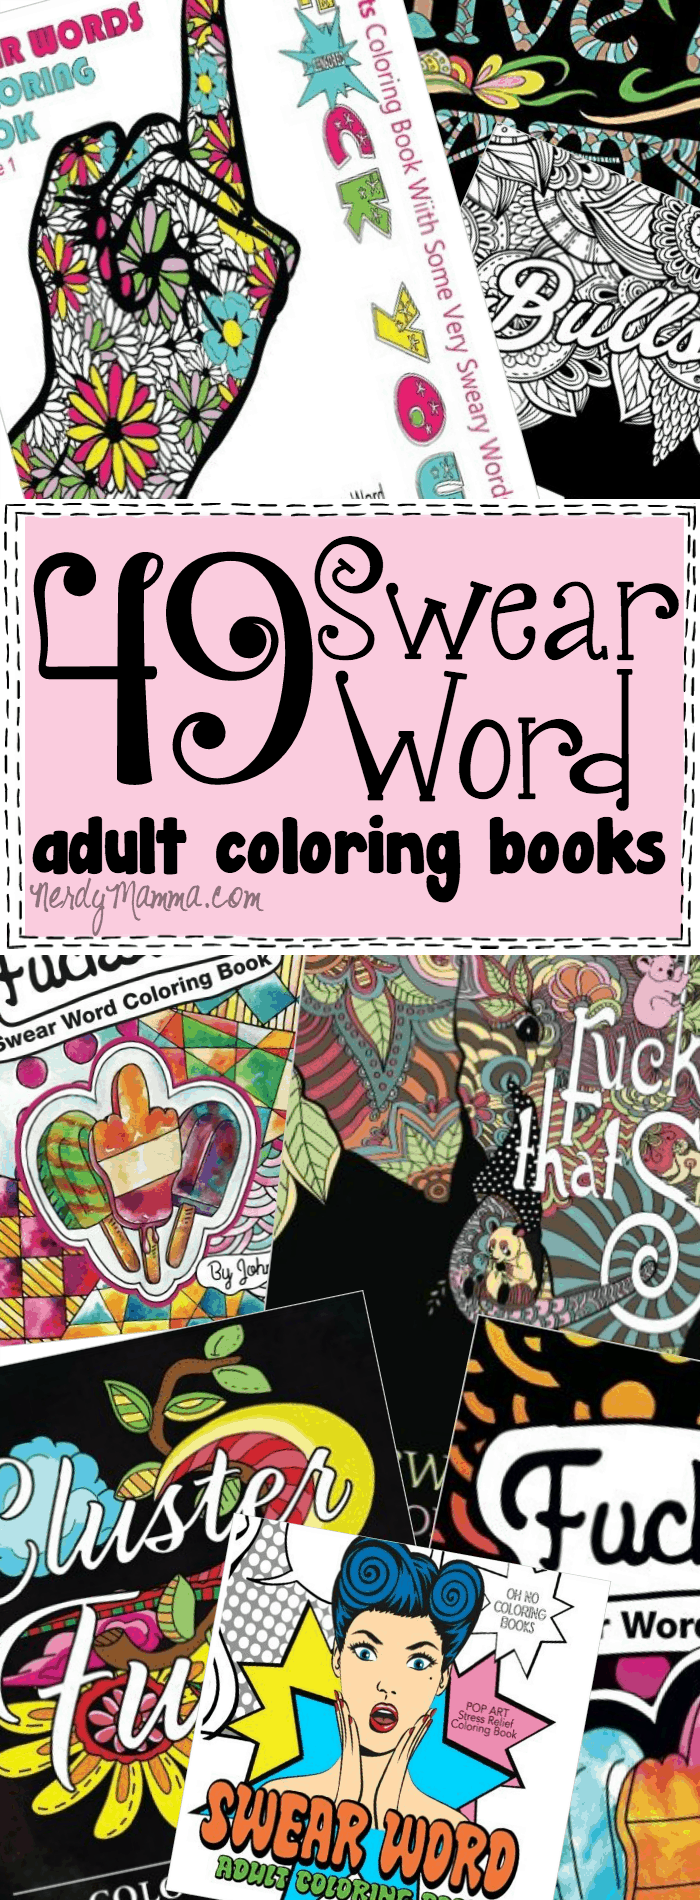 OMG! I can't stop giggling. This is so funny--there are 49 Swear Word adult coloring books! Love. This. LOL!